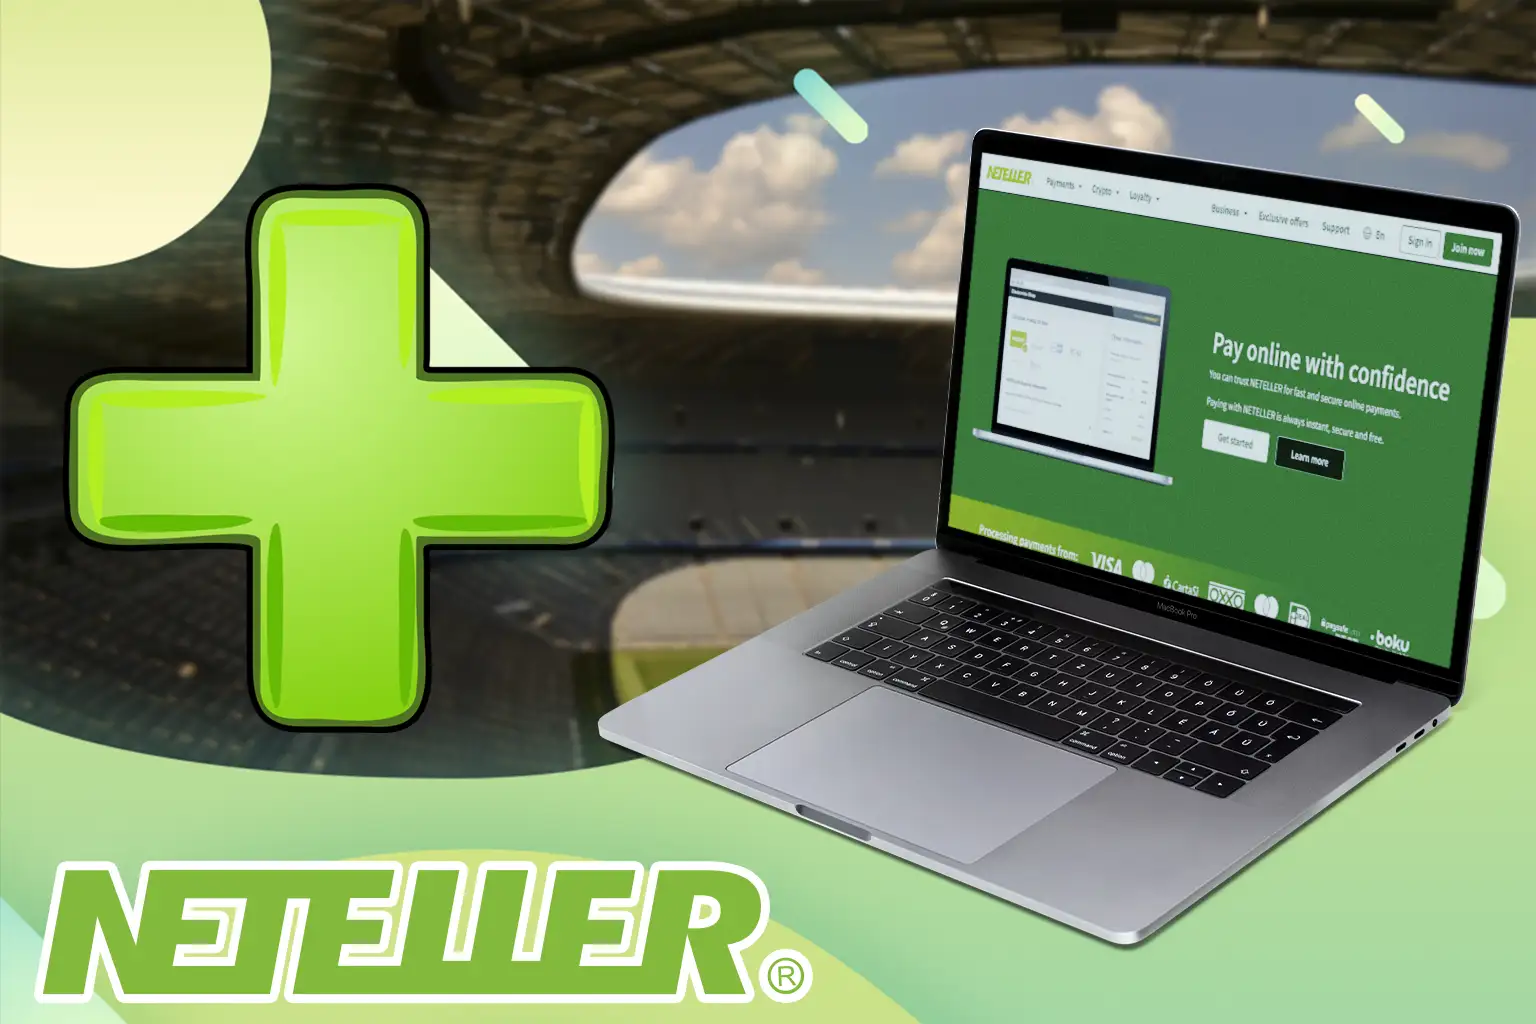 Learn about the strengths of the Neteller app that set it apart from the competition.